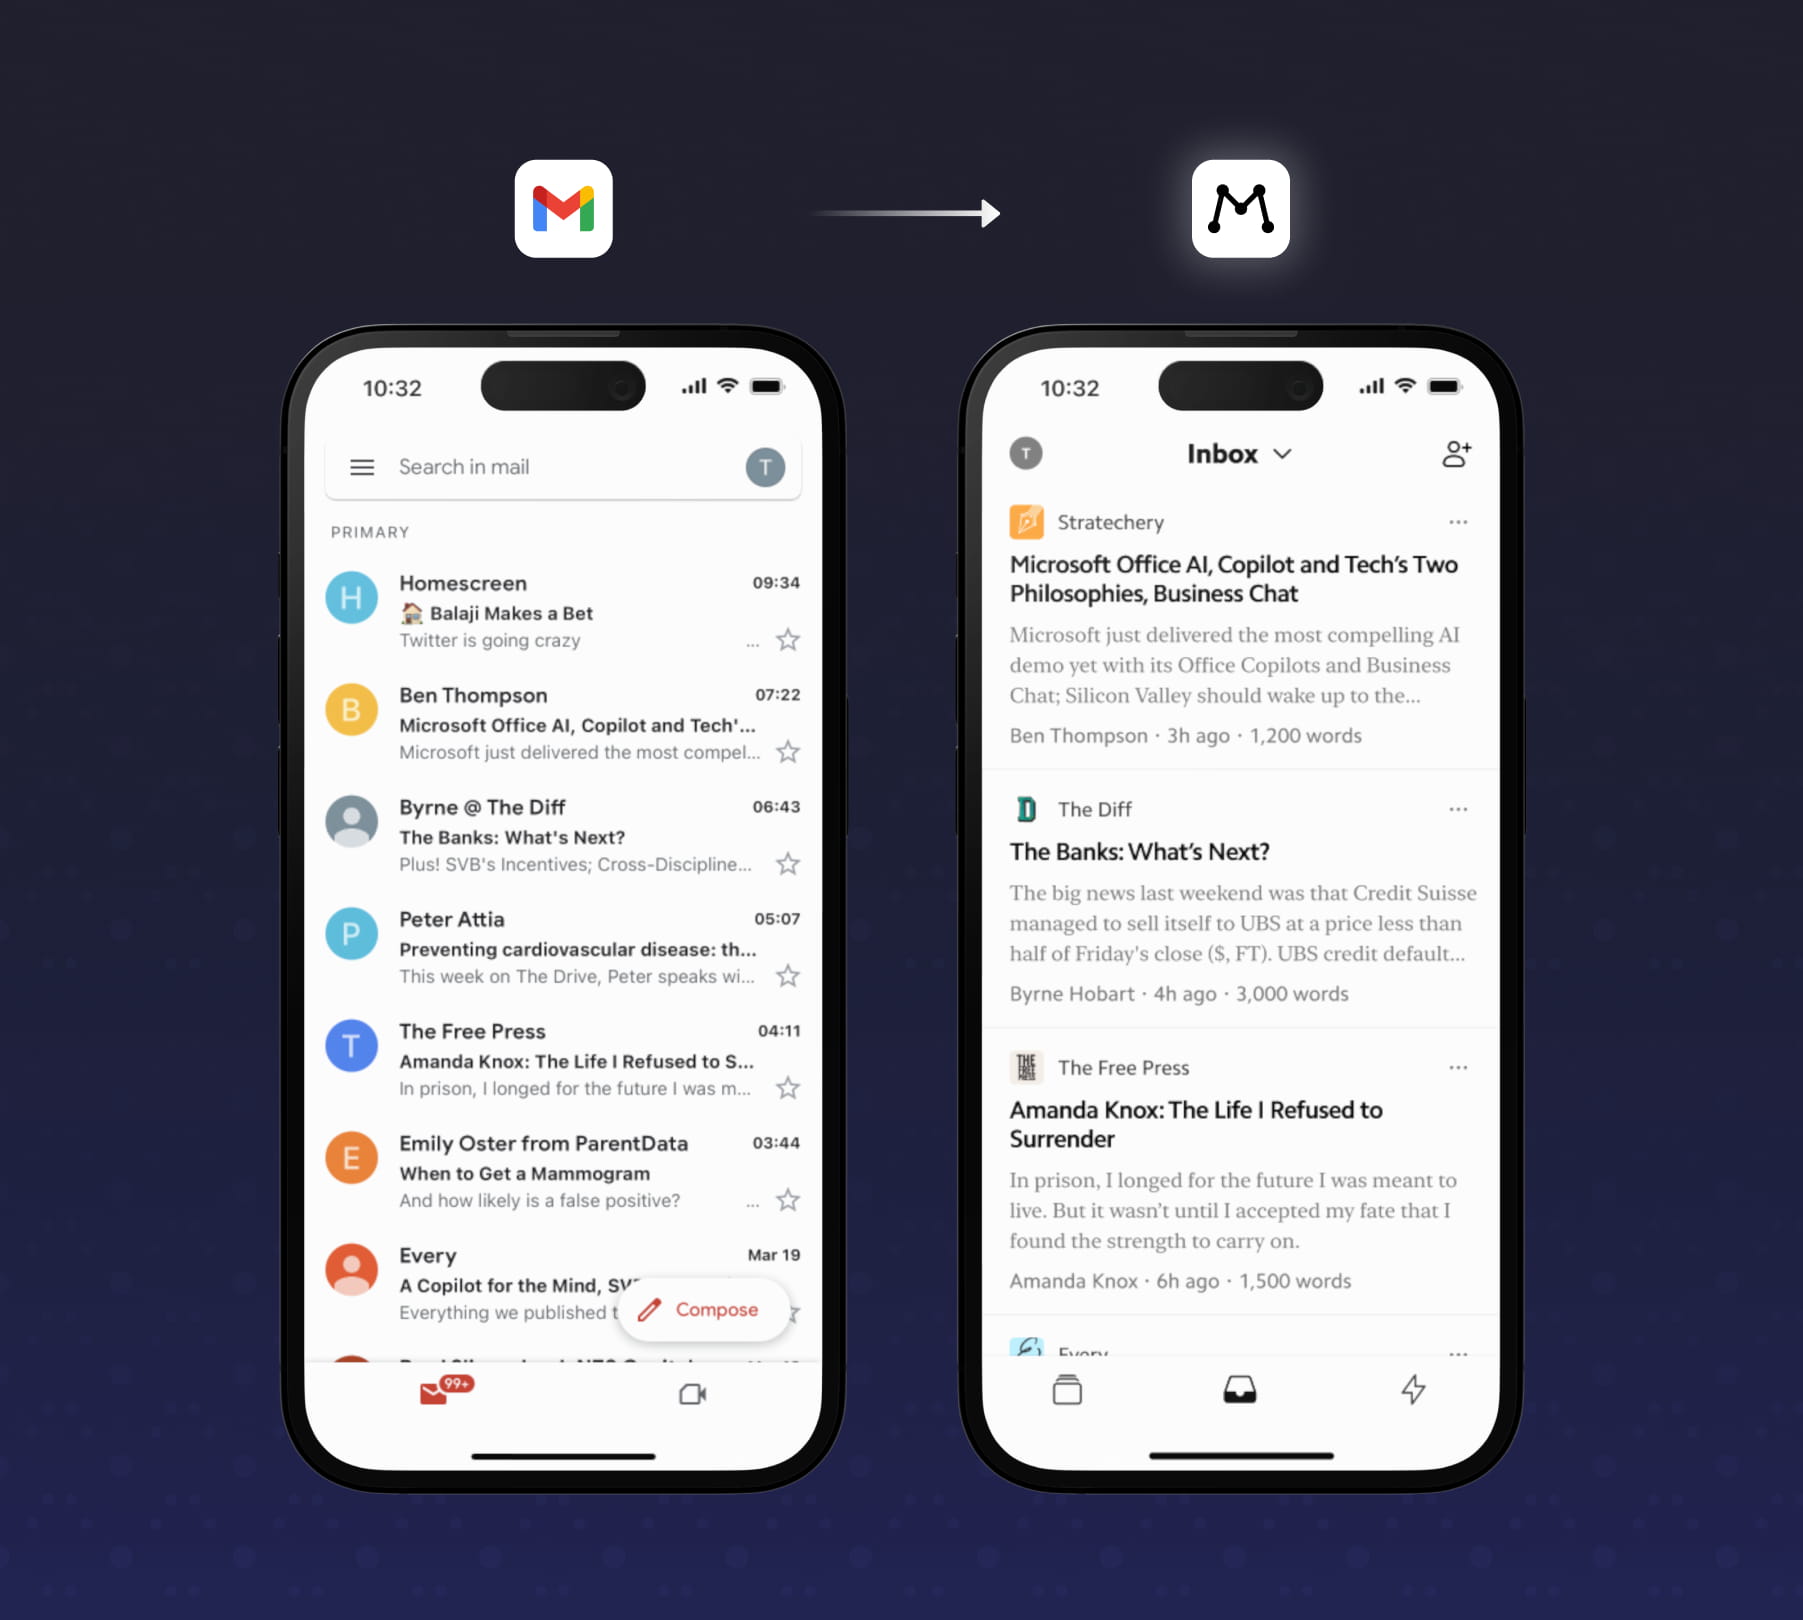 Two phone screens side by side. The left screen shows how newsletters appear in Gmail, and the right screen shows a nicer presentation in the Matter app.